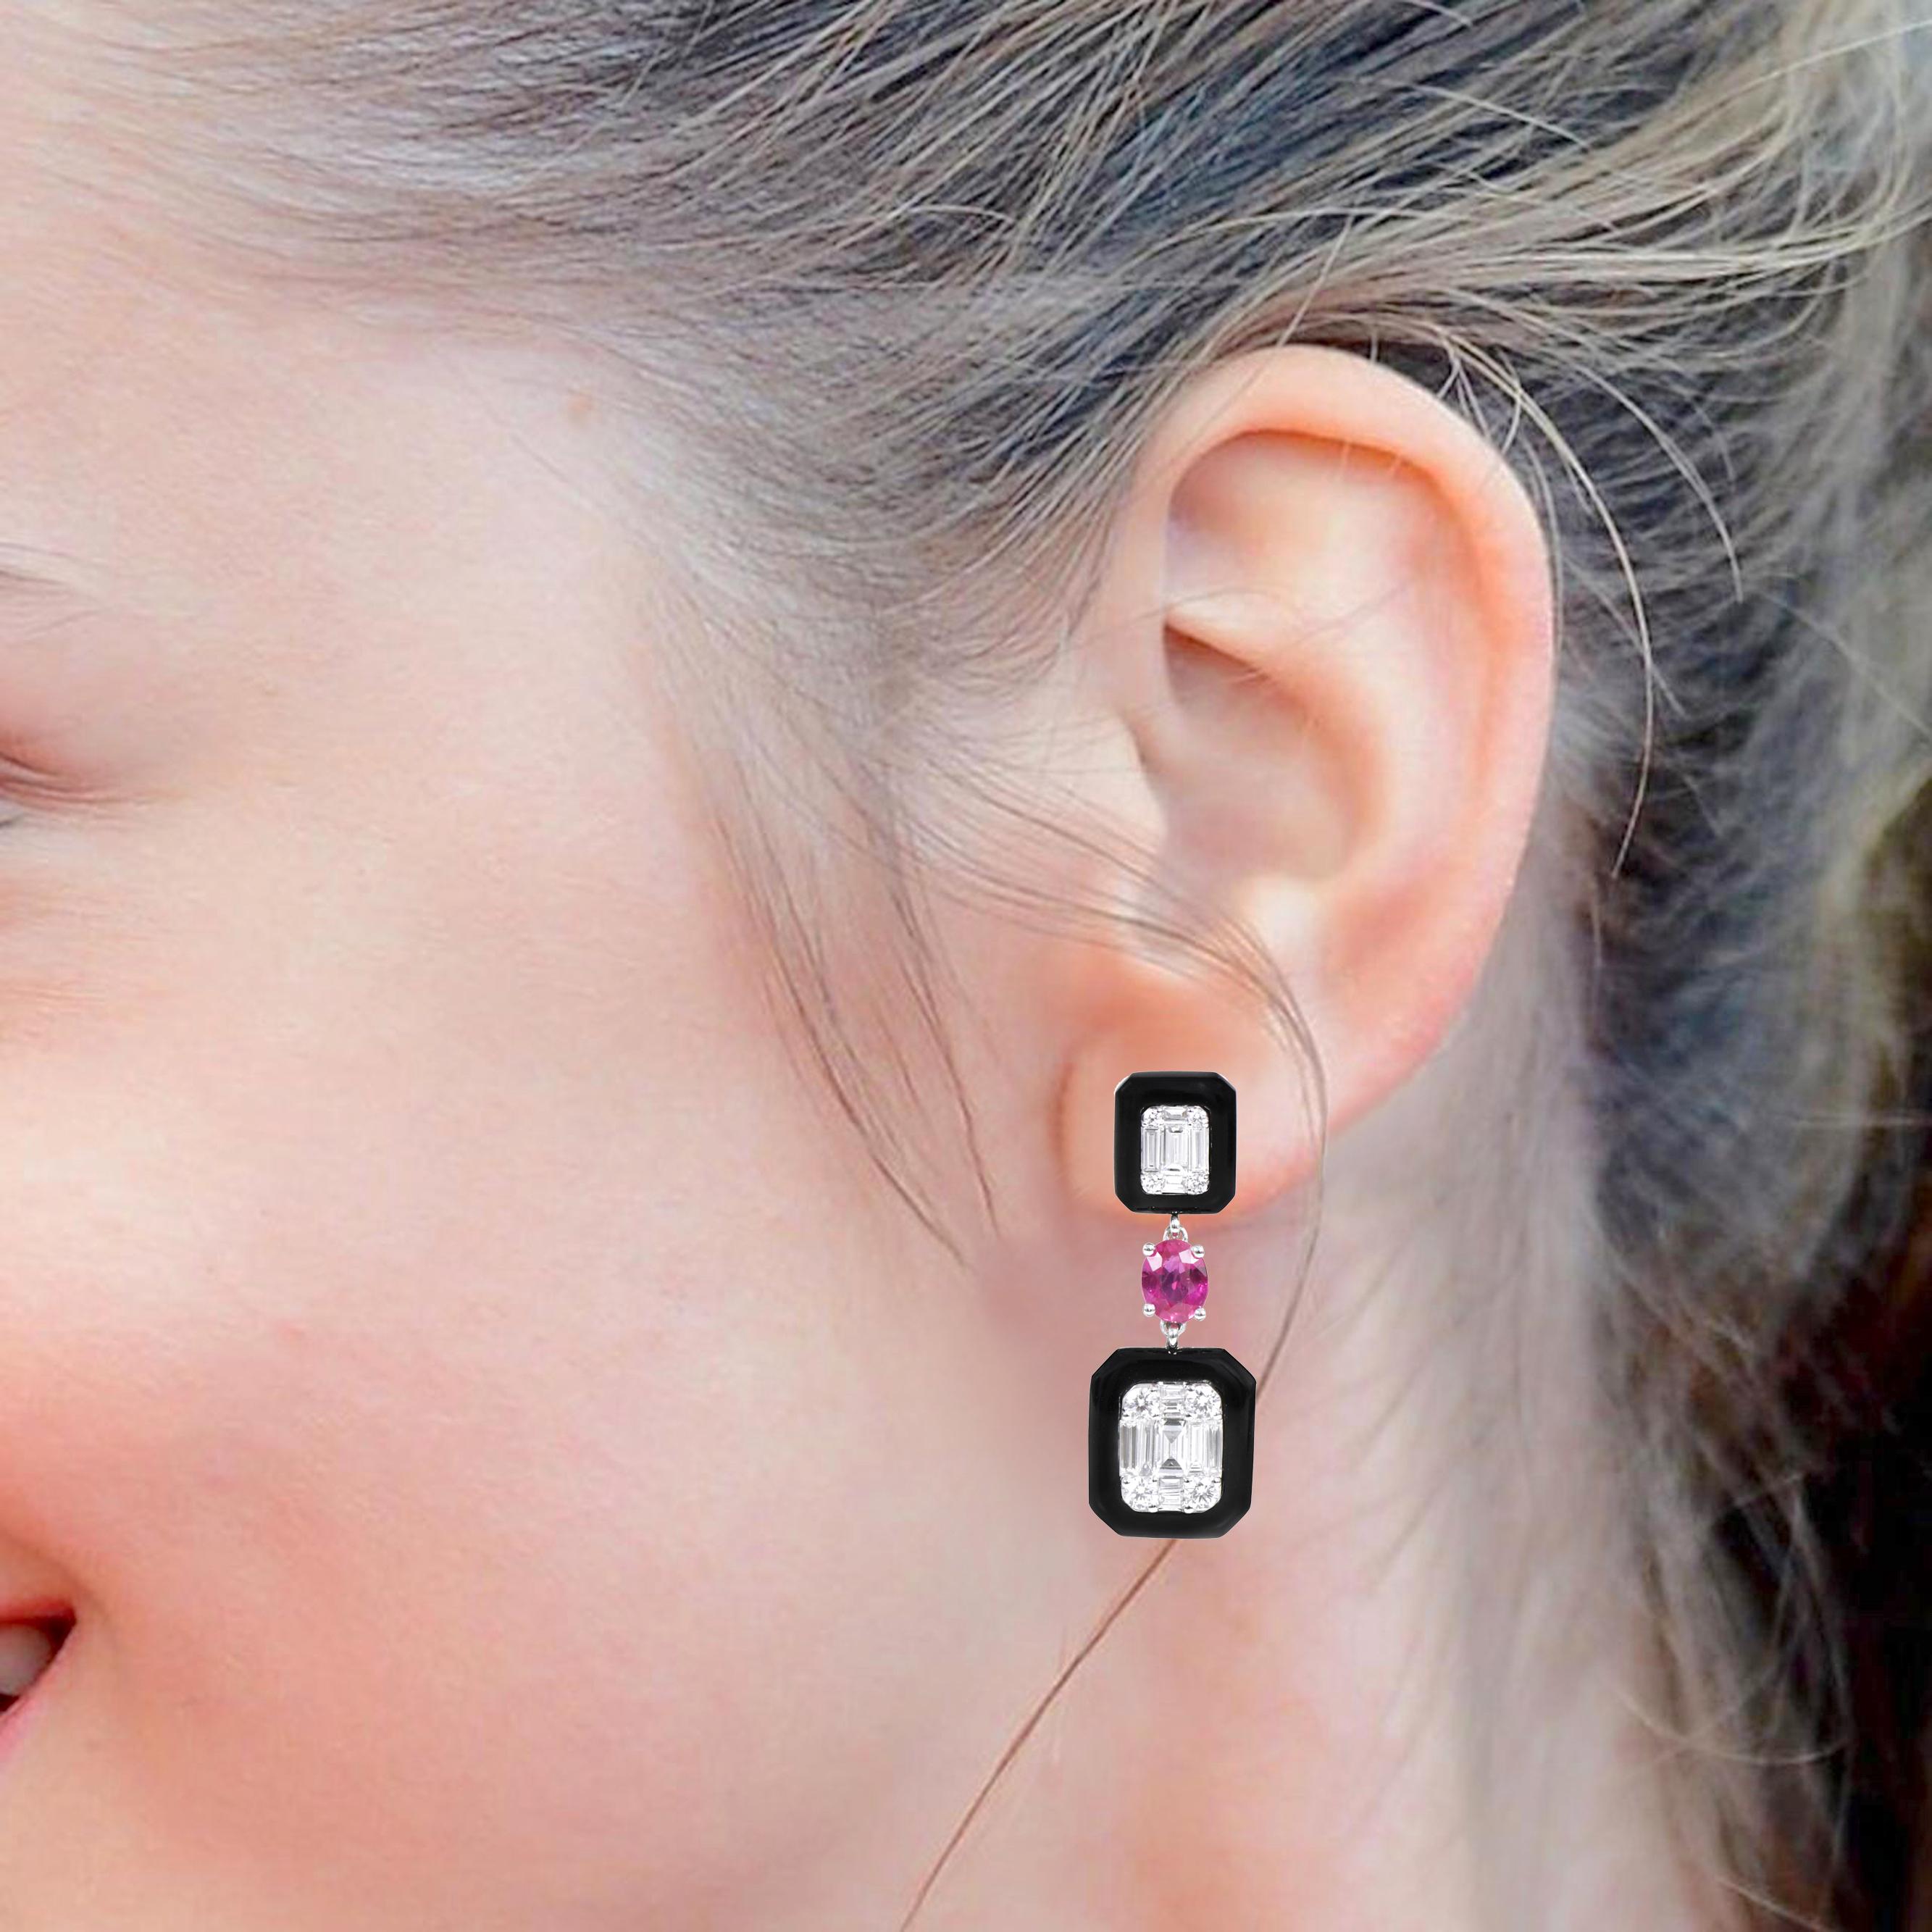 18 Karat White Gold 5.30 Carat Diamond, Ruby, and Black Onyx Dangle Earrings

This contemporary invisible set emerald cut diamond and jet black onyx and wine red ruby long earring is impressive. The bottom half of invisible diamond emerald cut in